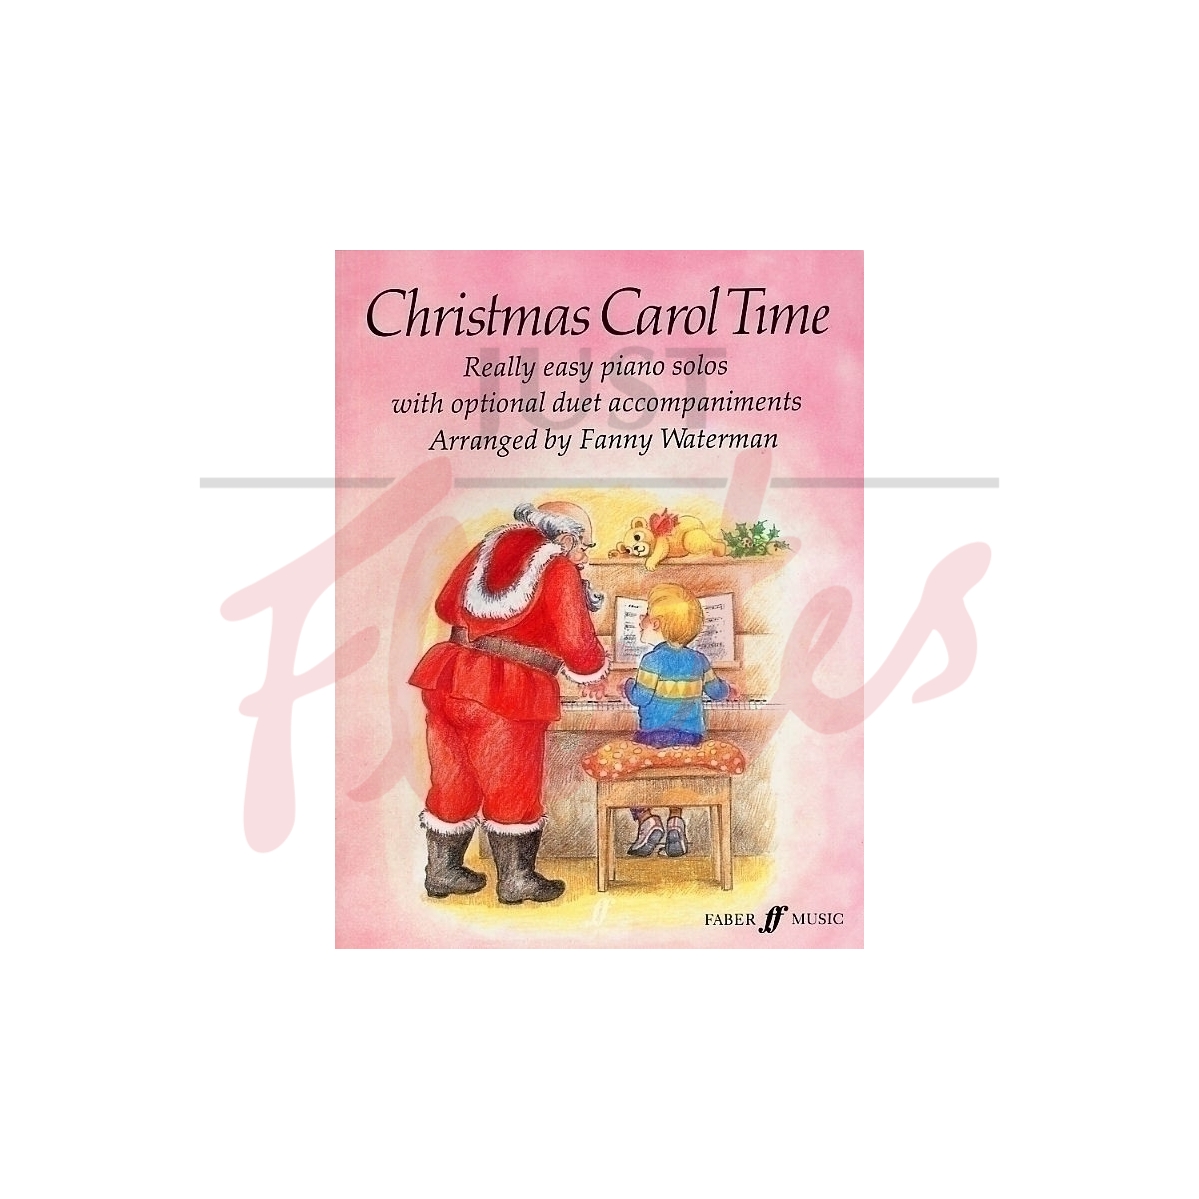 Christmas Carol Time (really easy piano solos with optional duet accompaniments)